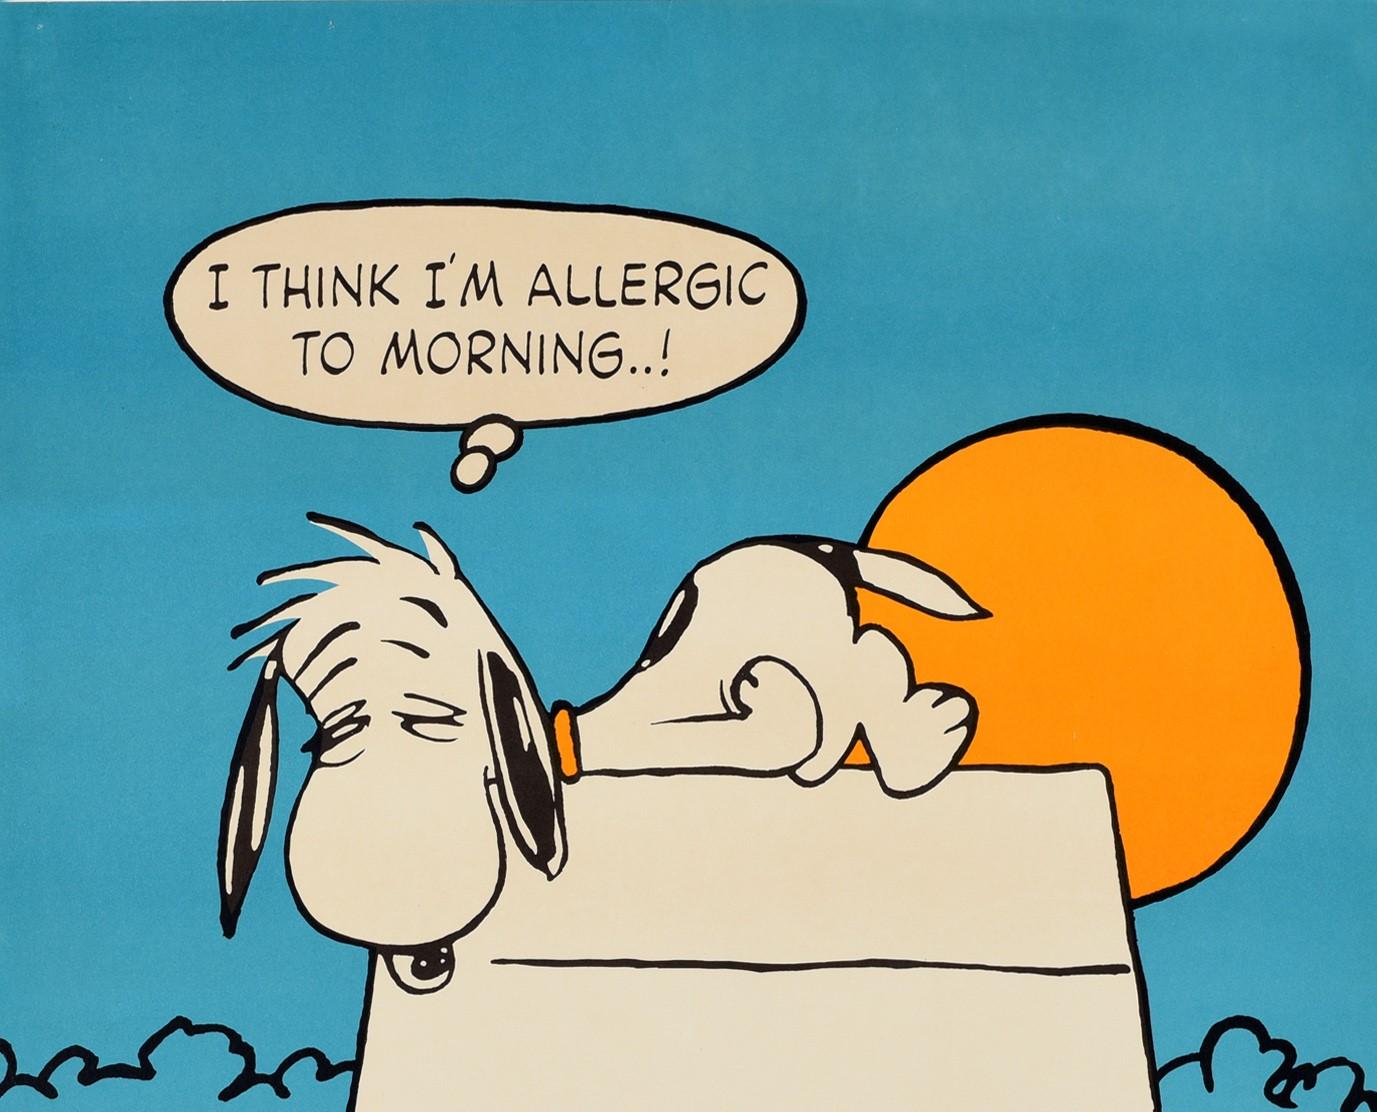 Original vintage Snoopy poster - I Think I'm Allergic to Morning..! - featuring a great illustration by the renowned American cartoonist Charles M. Schulz (Charles Monroe Schulz 